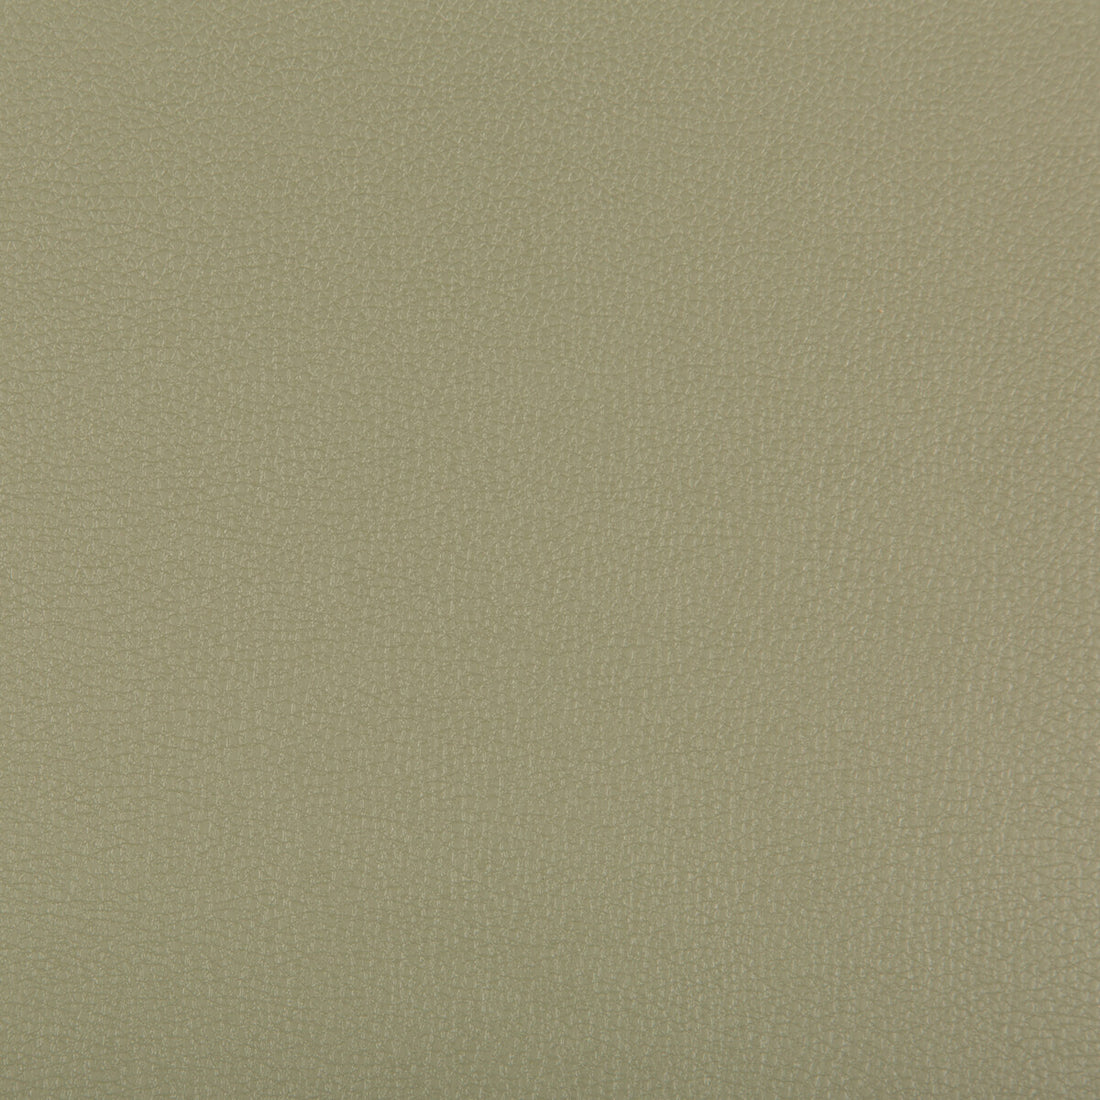 Syrus fabric in sage color - pattern SYRUS.311.0 - by Kravet Contract